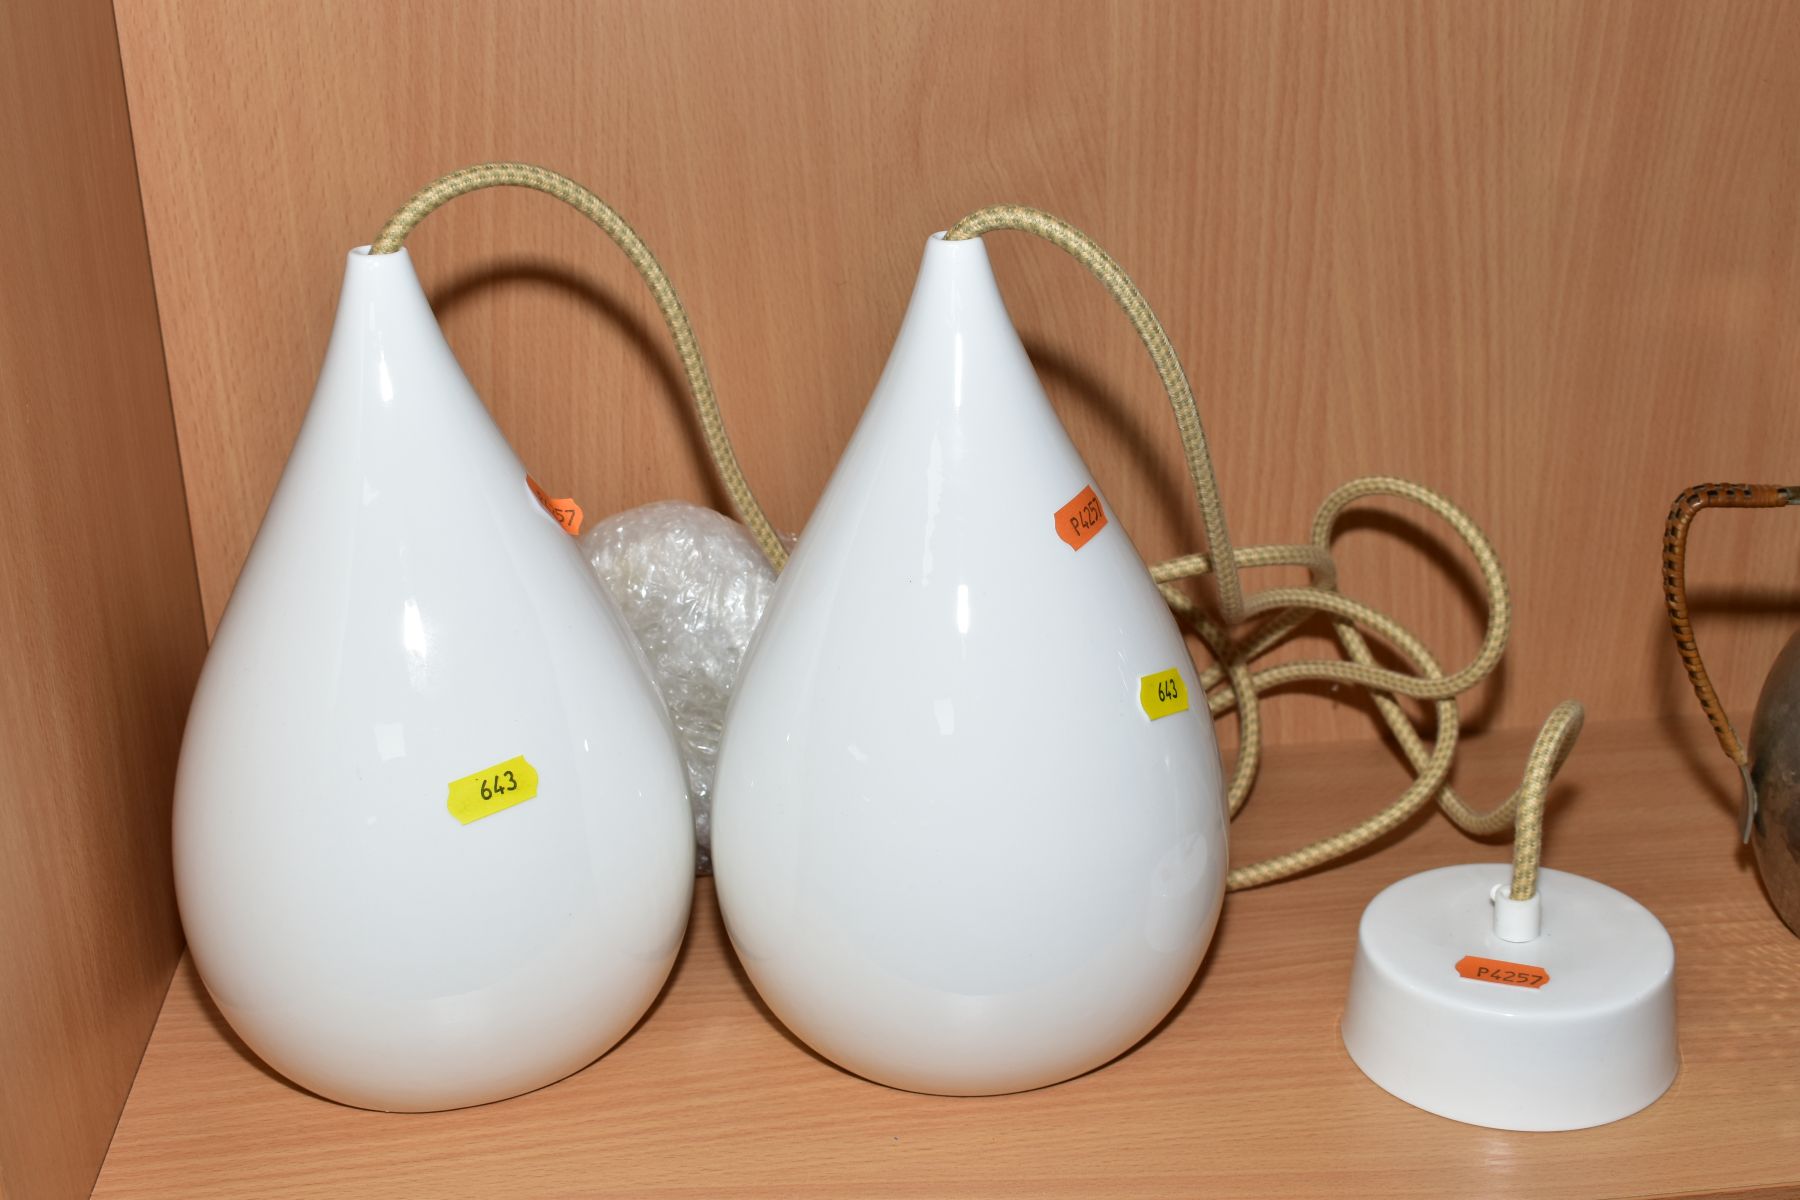 TWO BOXED WHITE CERAMIC CONRAN SHOP PENDANT DROP LIGHT FITTINGS, model No.345 by the Original BTC, - Image 2 of 3